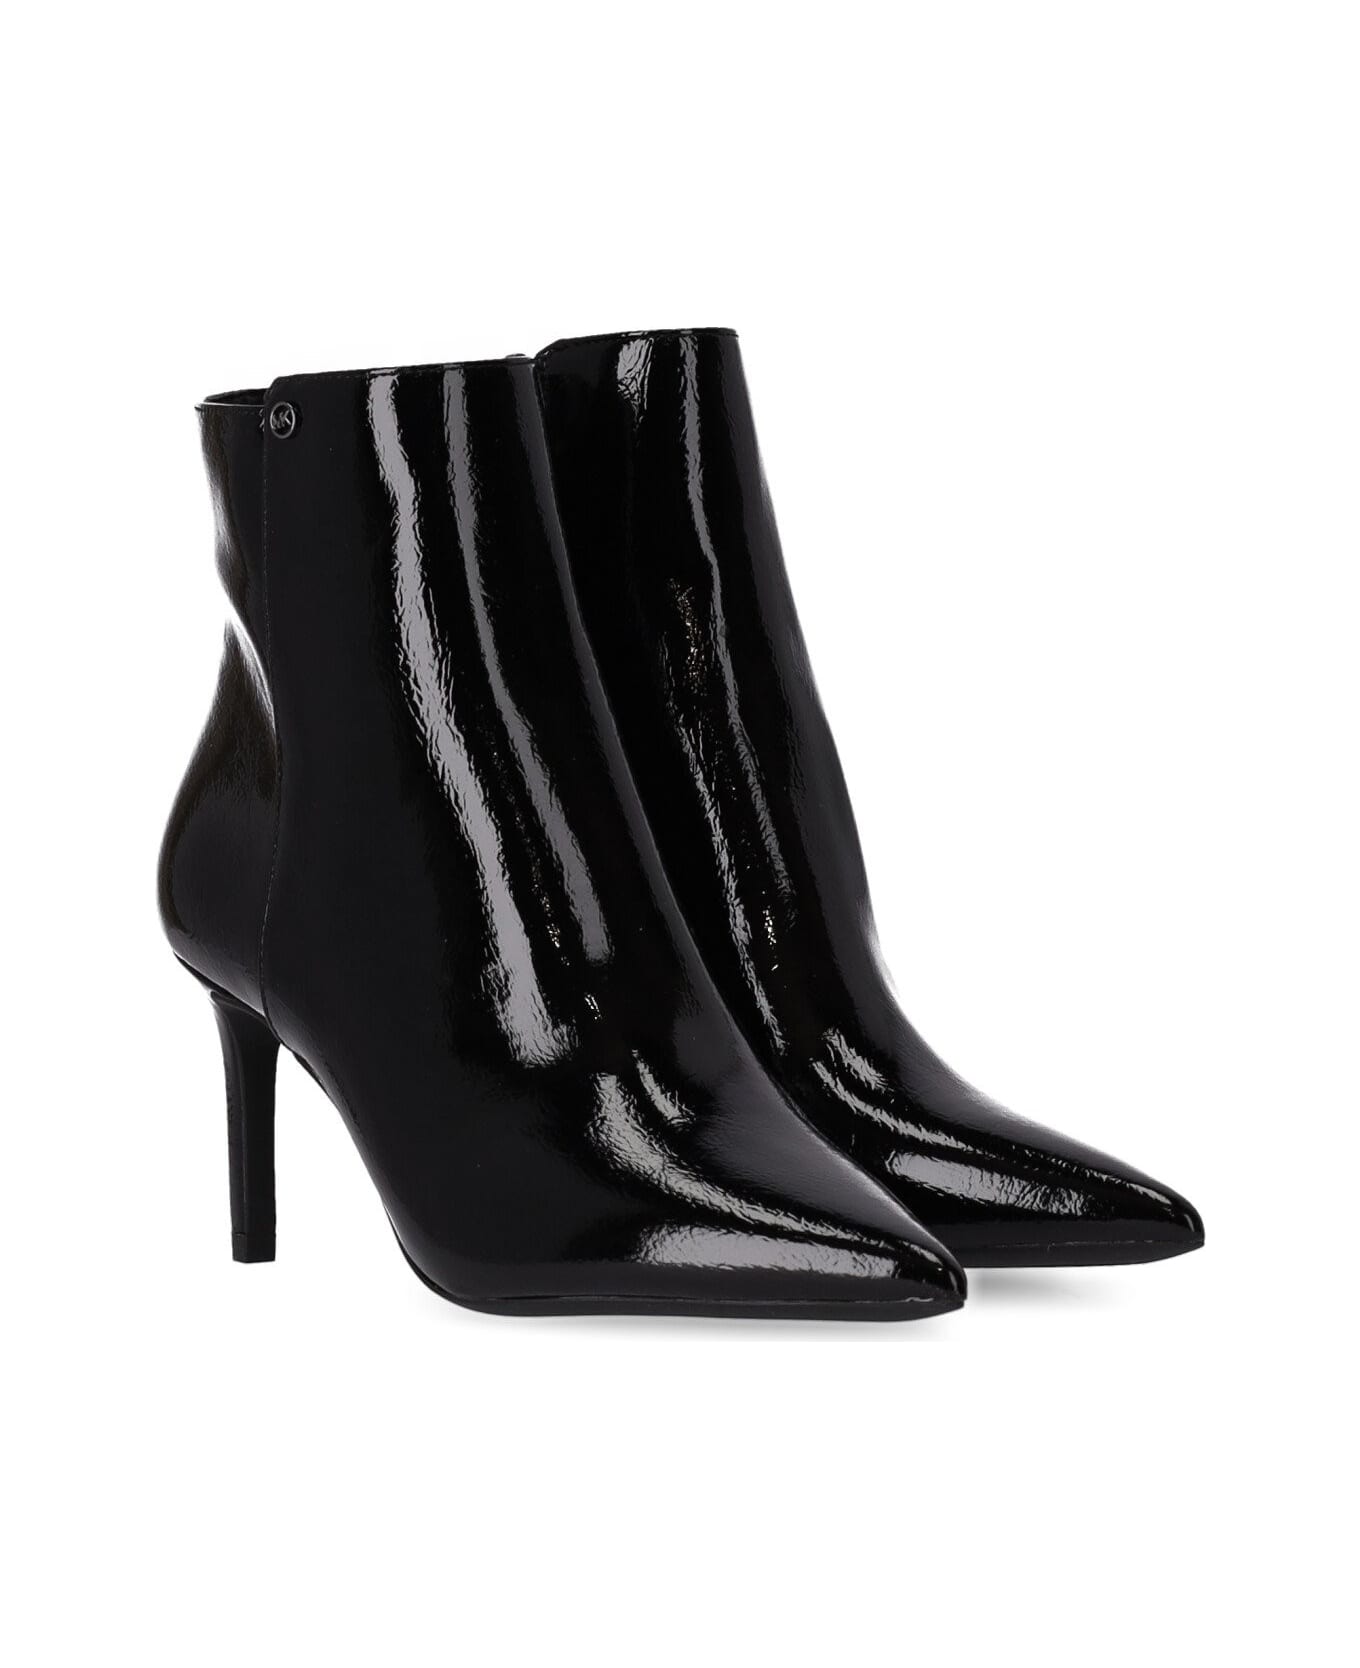 Michael Kors Polished Pointed Toe Ankle Boots - Nero ブーツ